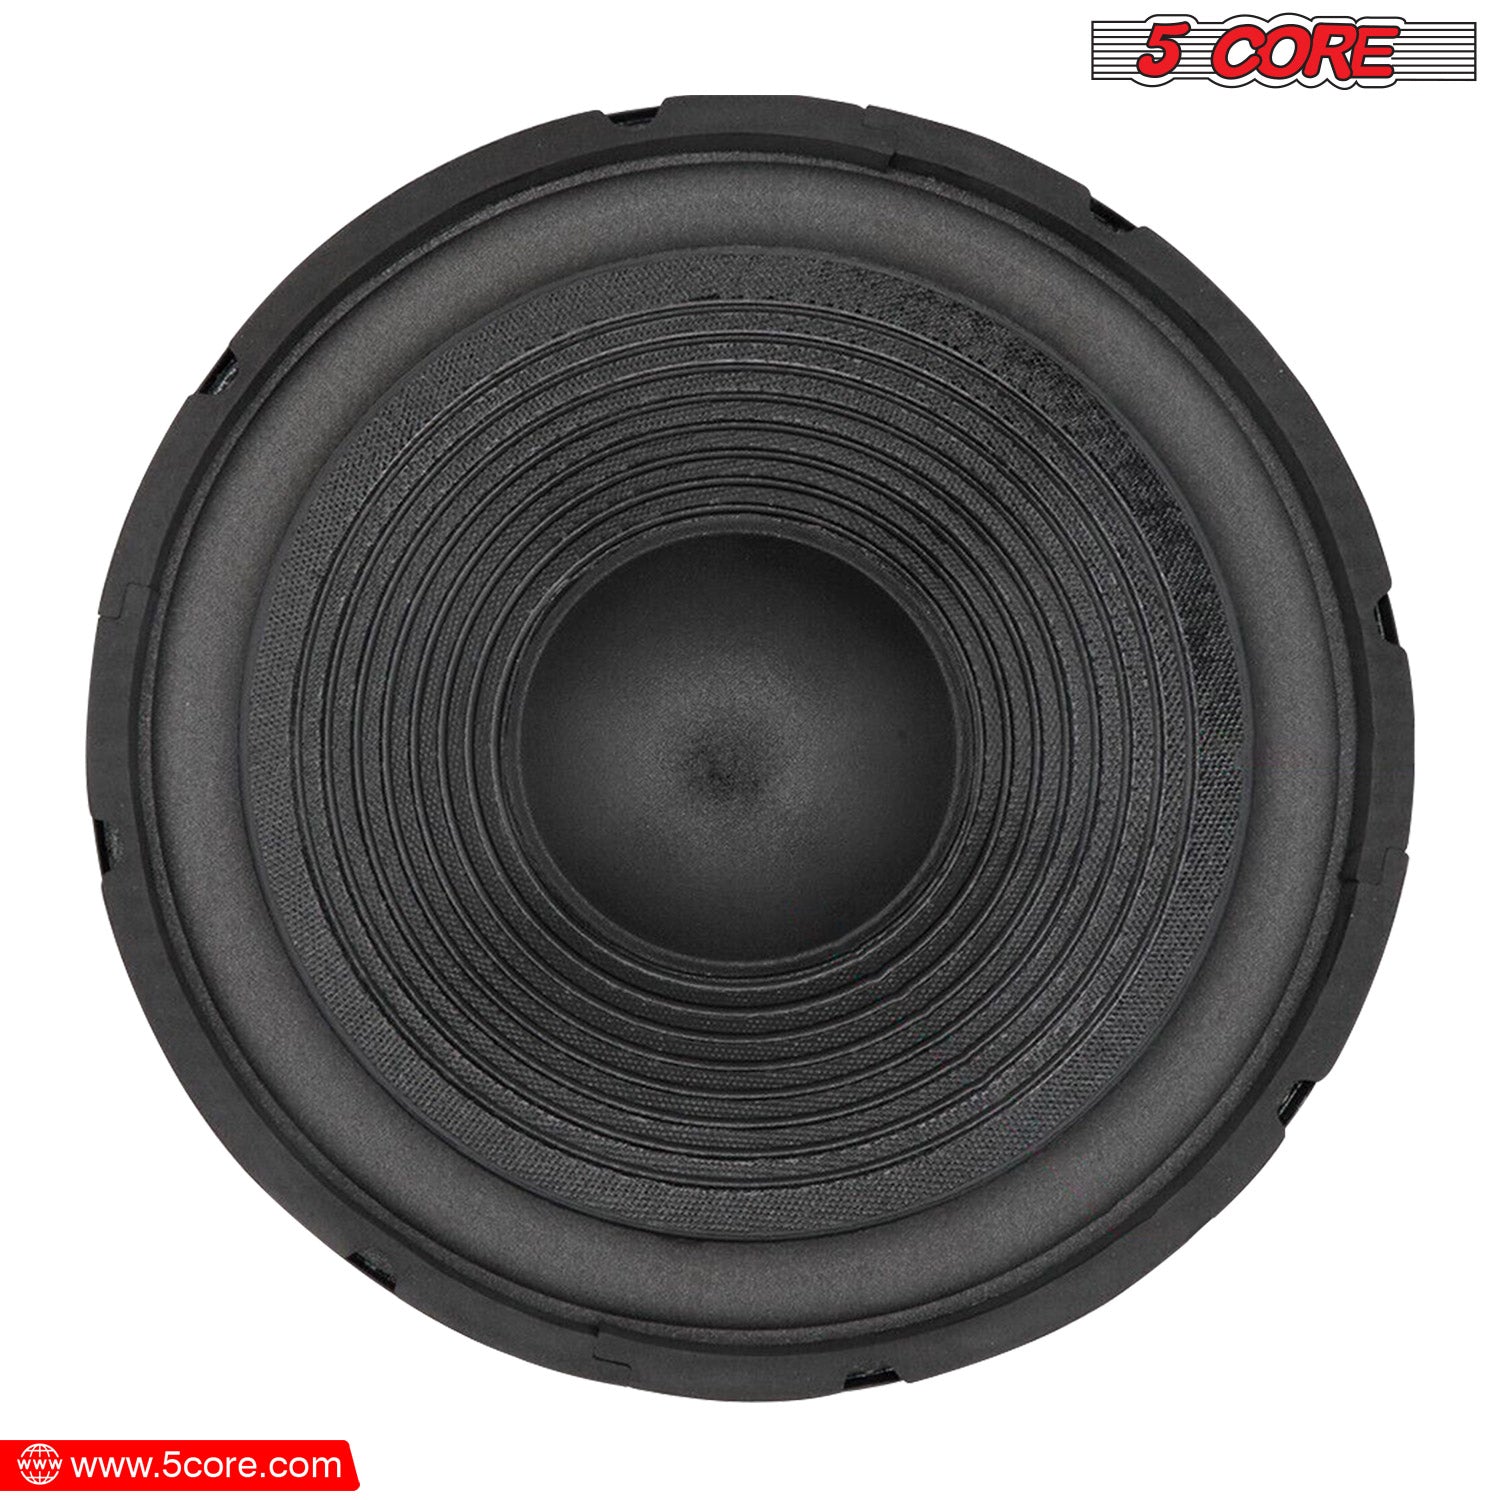 5 Core 12 Inch Guitar Speaker - 120W RMS, 8 Ohm, 23 Oz Magnet Replacement Driver